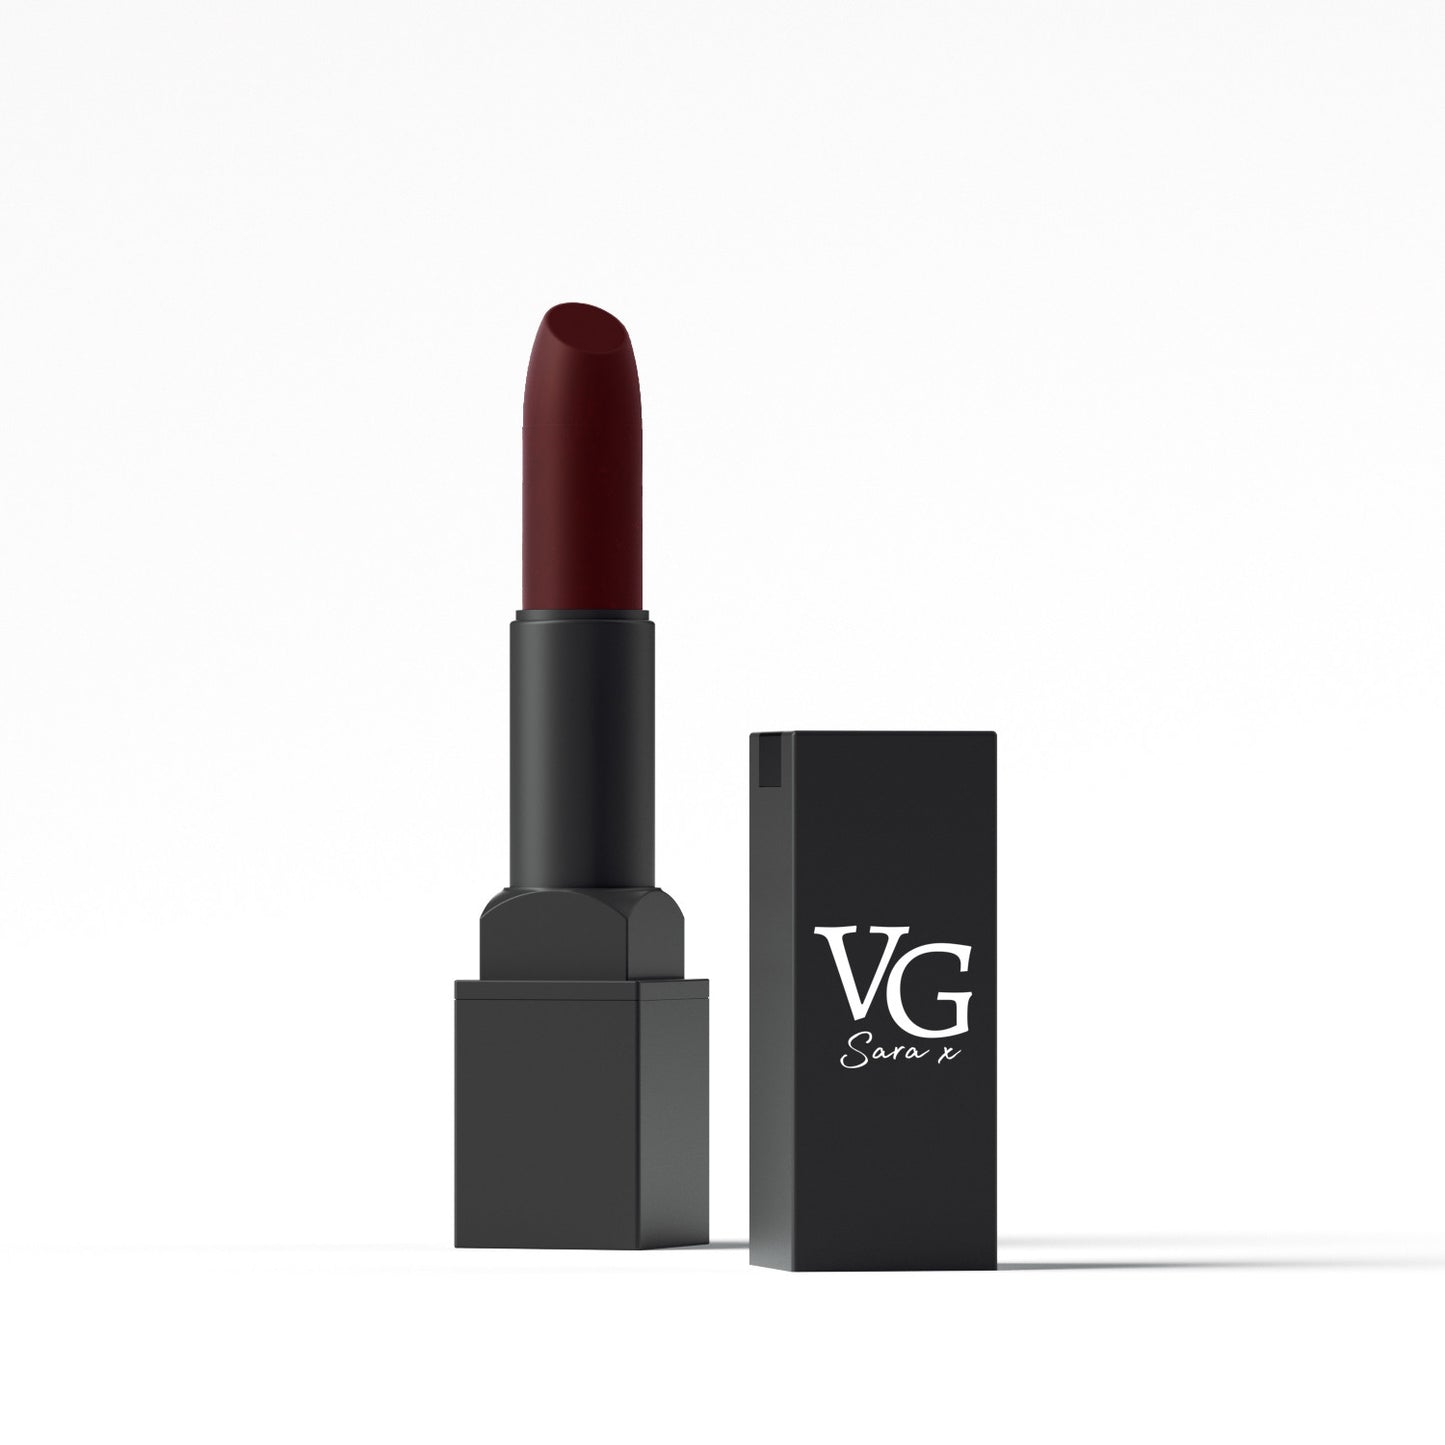 Branded VG Cosmetics lipstick with natural ingredients